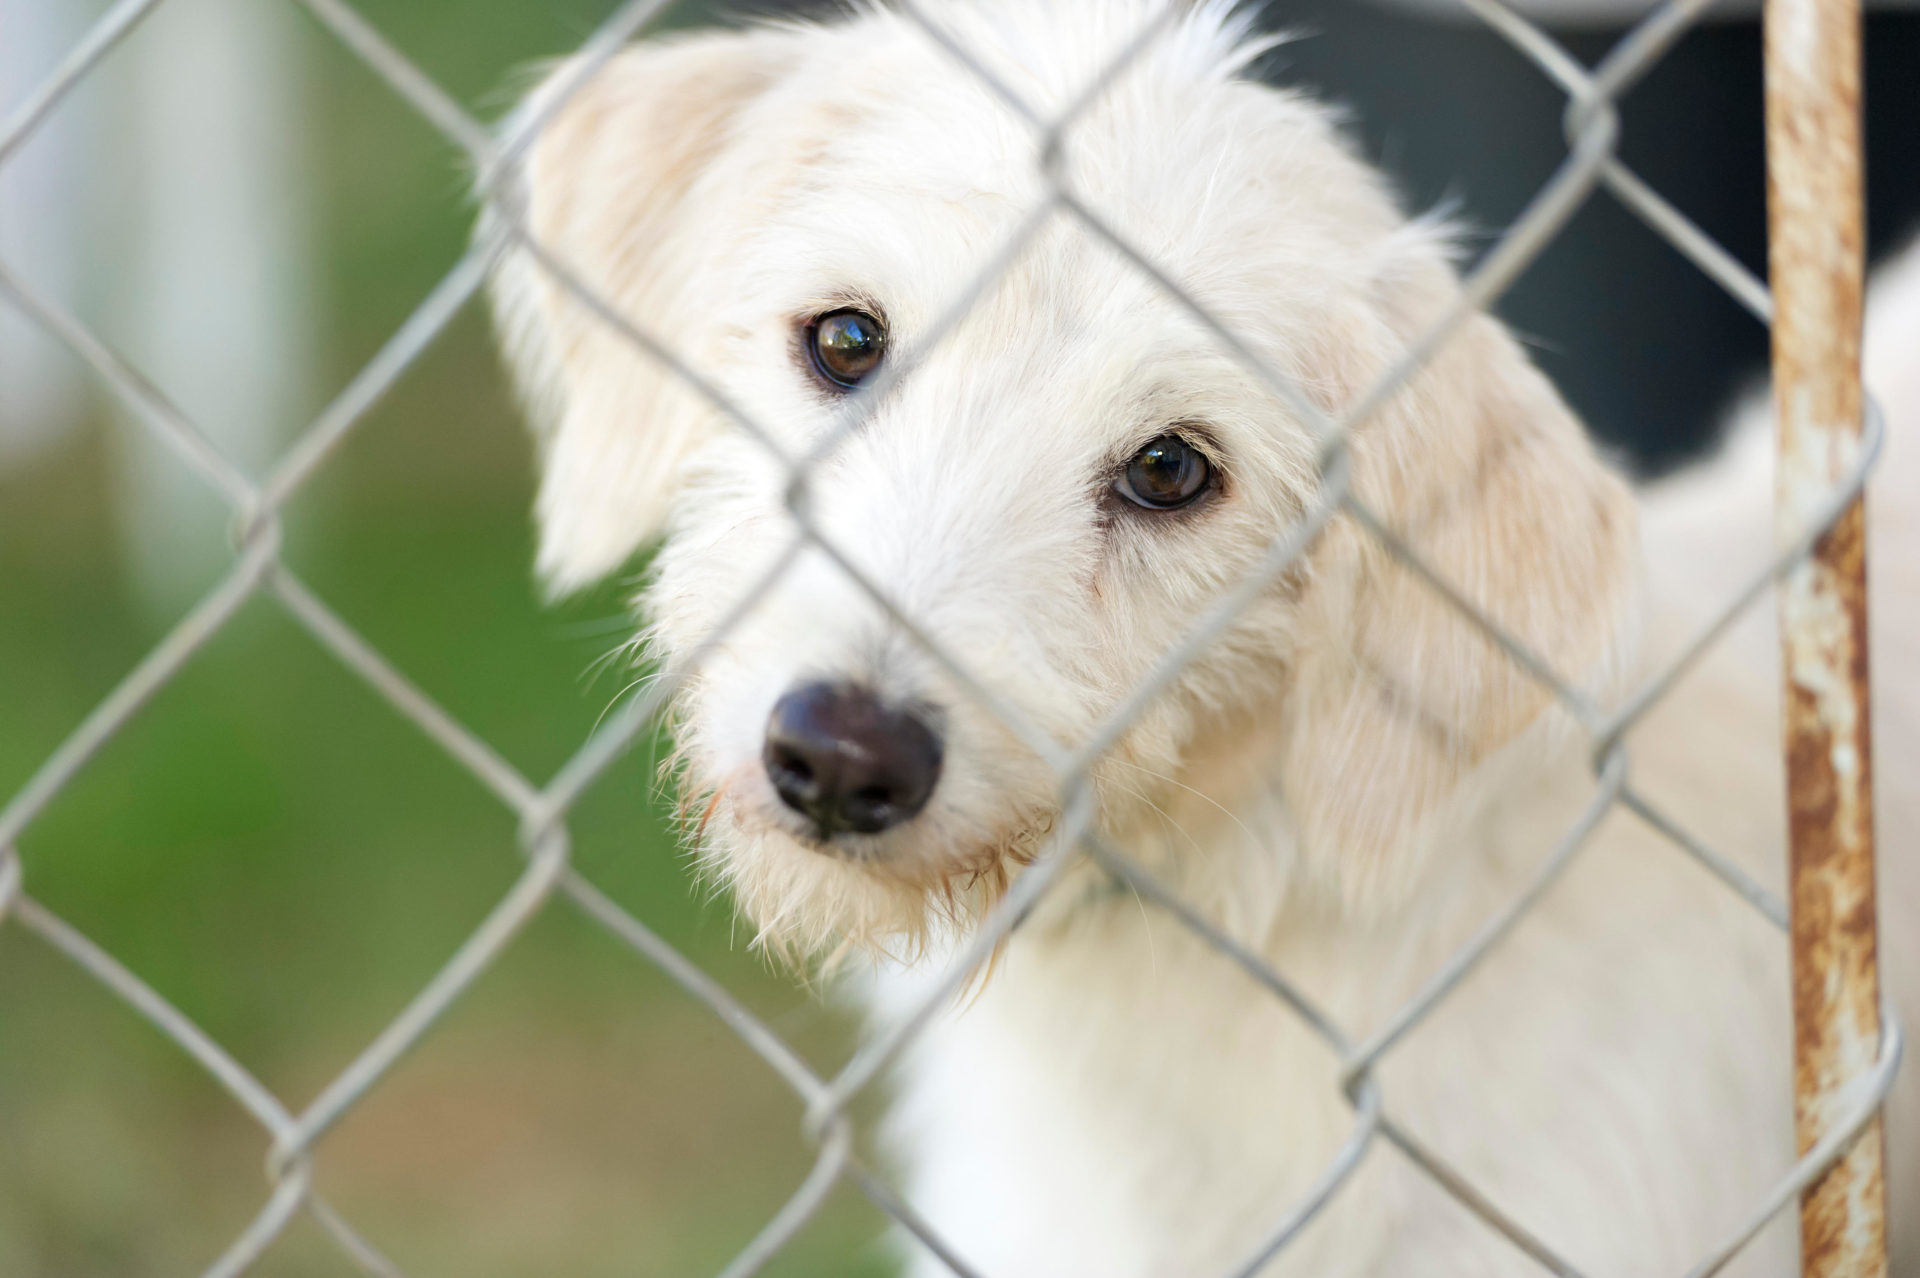 A dog pokes his nose through the fence of an animal shelter, wondering who is going to take him home.